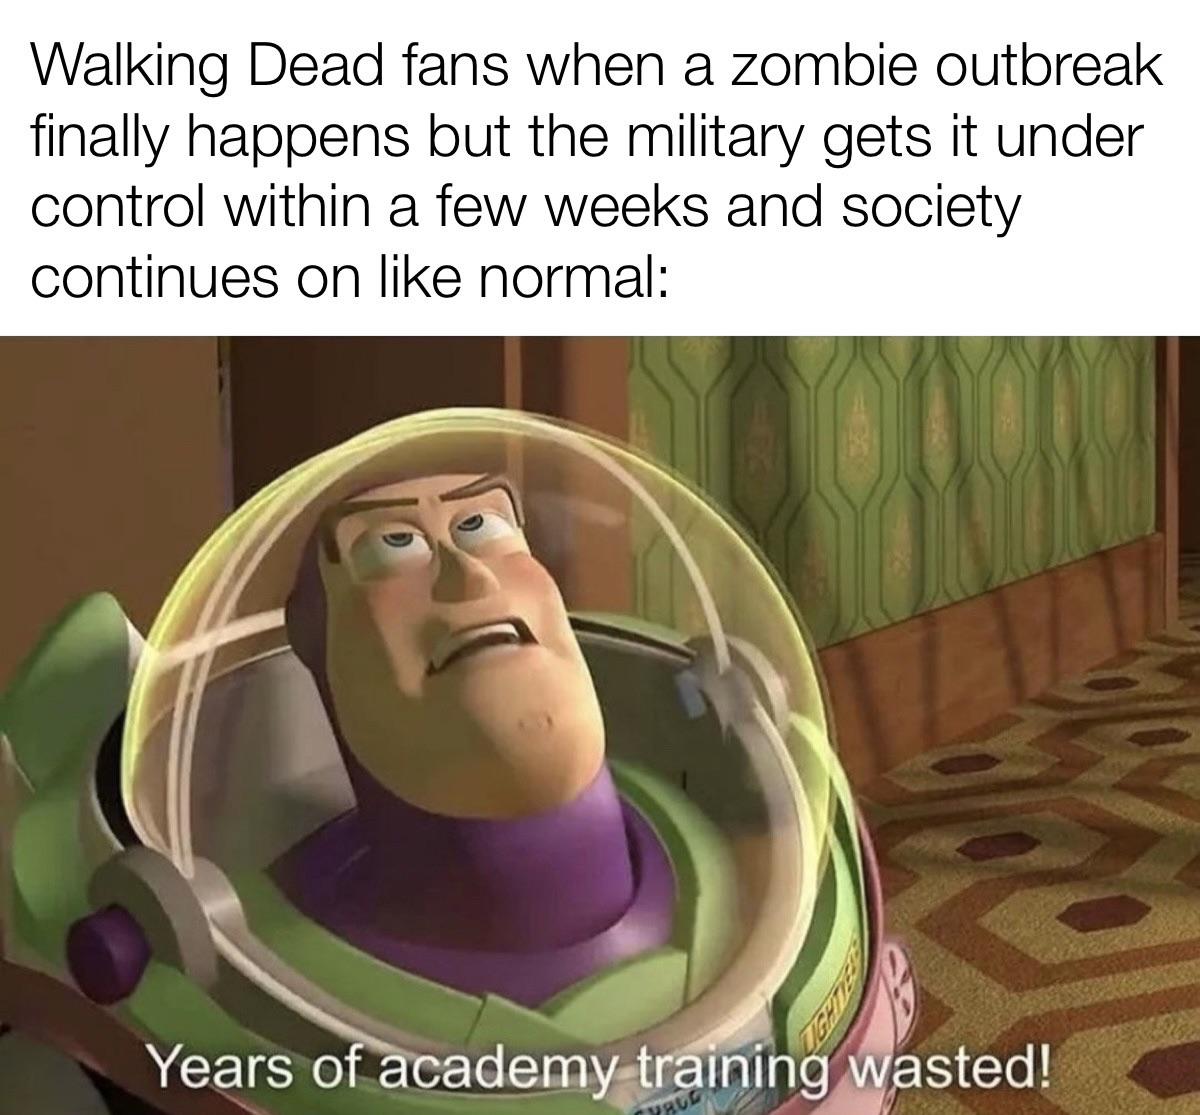 dank memes - asking out girls memes - Walking Dead fans when a zombie outbreak finally happens but the military gets it under control within a few weeks and society continues on normal Years of academy training wasted!